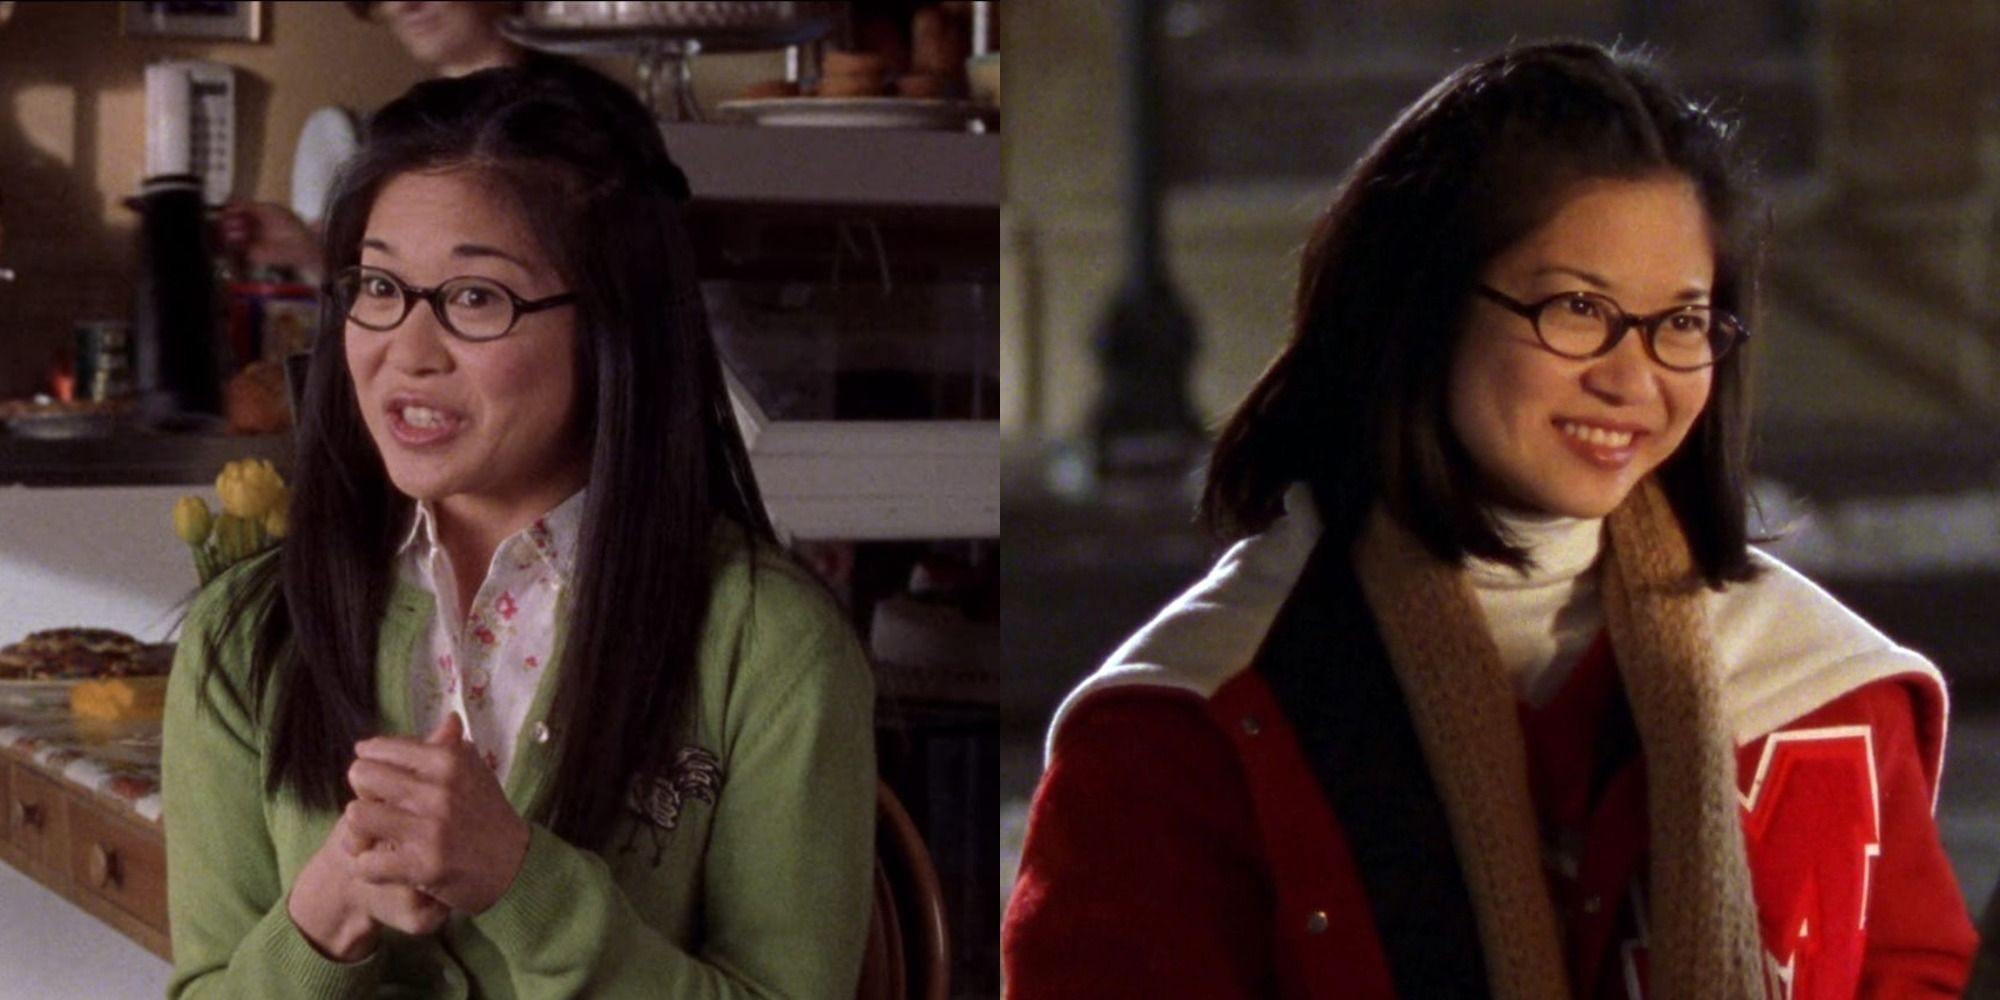 A split image of Lane from the Gilmore Girls series.